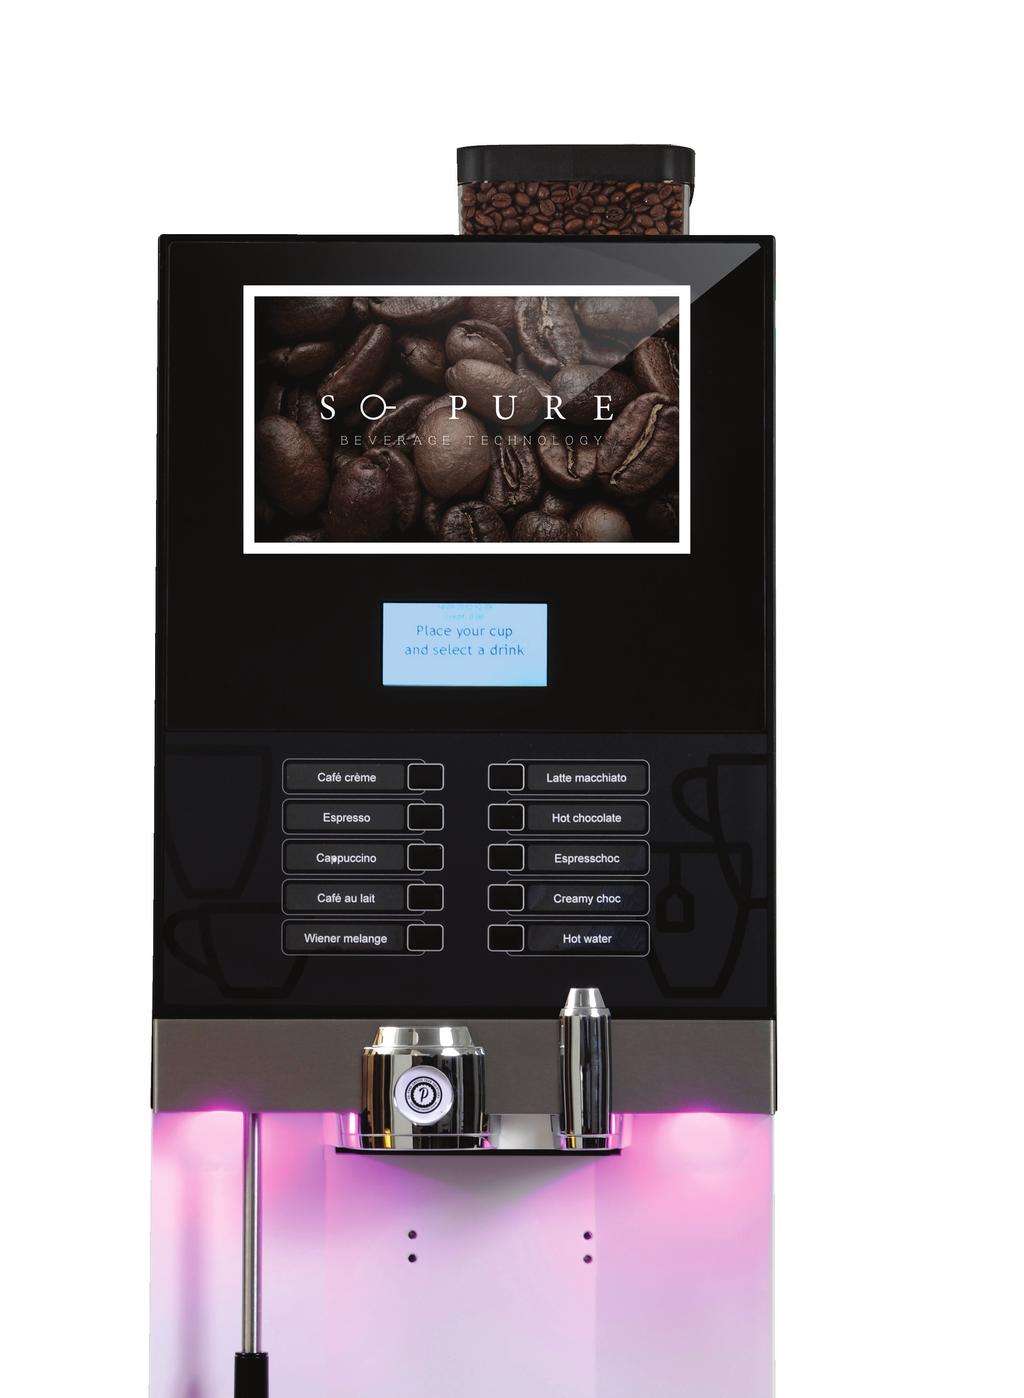 The So Pure Espresso offers a go large or go decaf option particularly suitable for HoReCa industry, Office Coffee Service, hotel catering businesses and convenience stores.